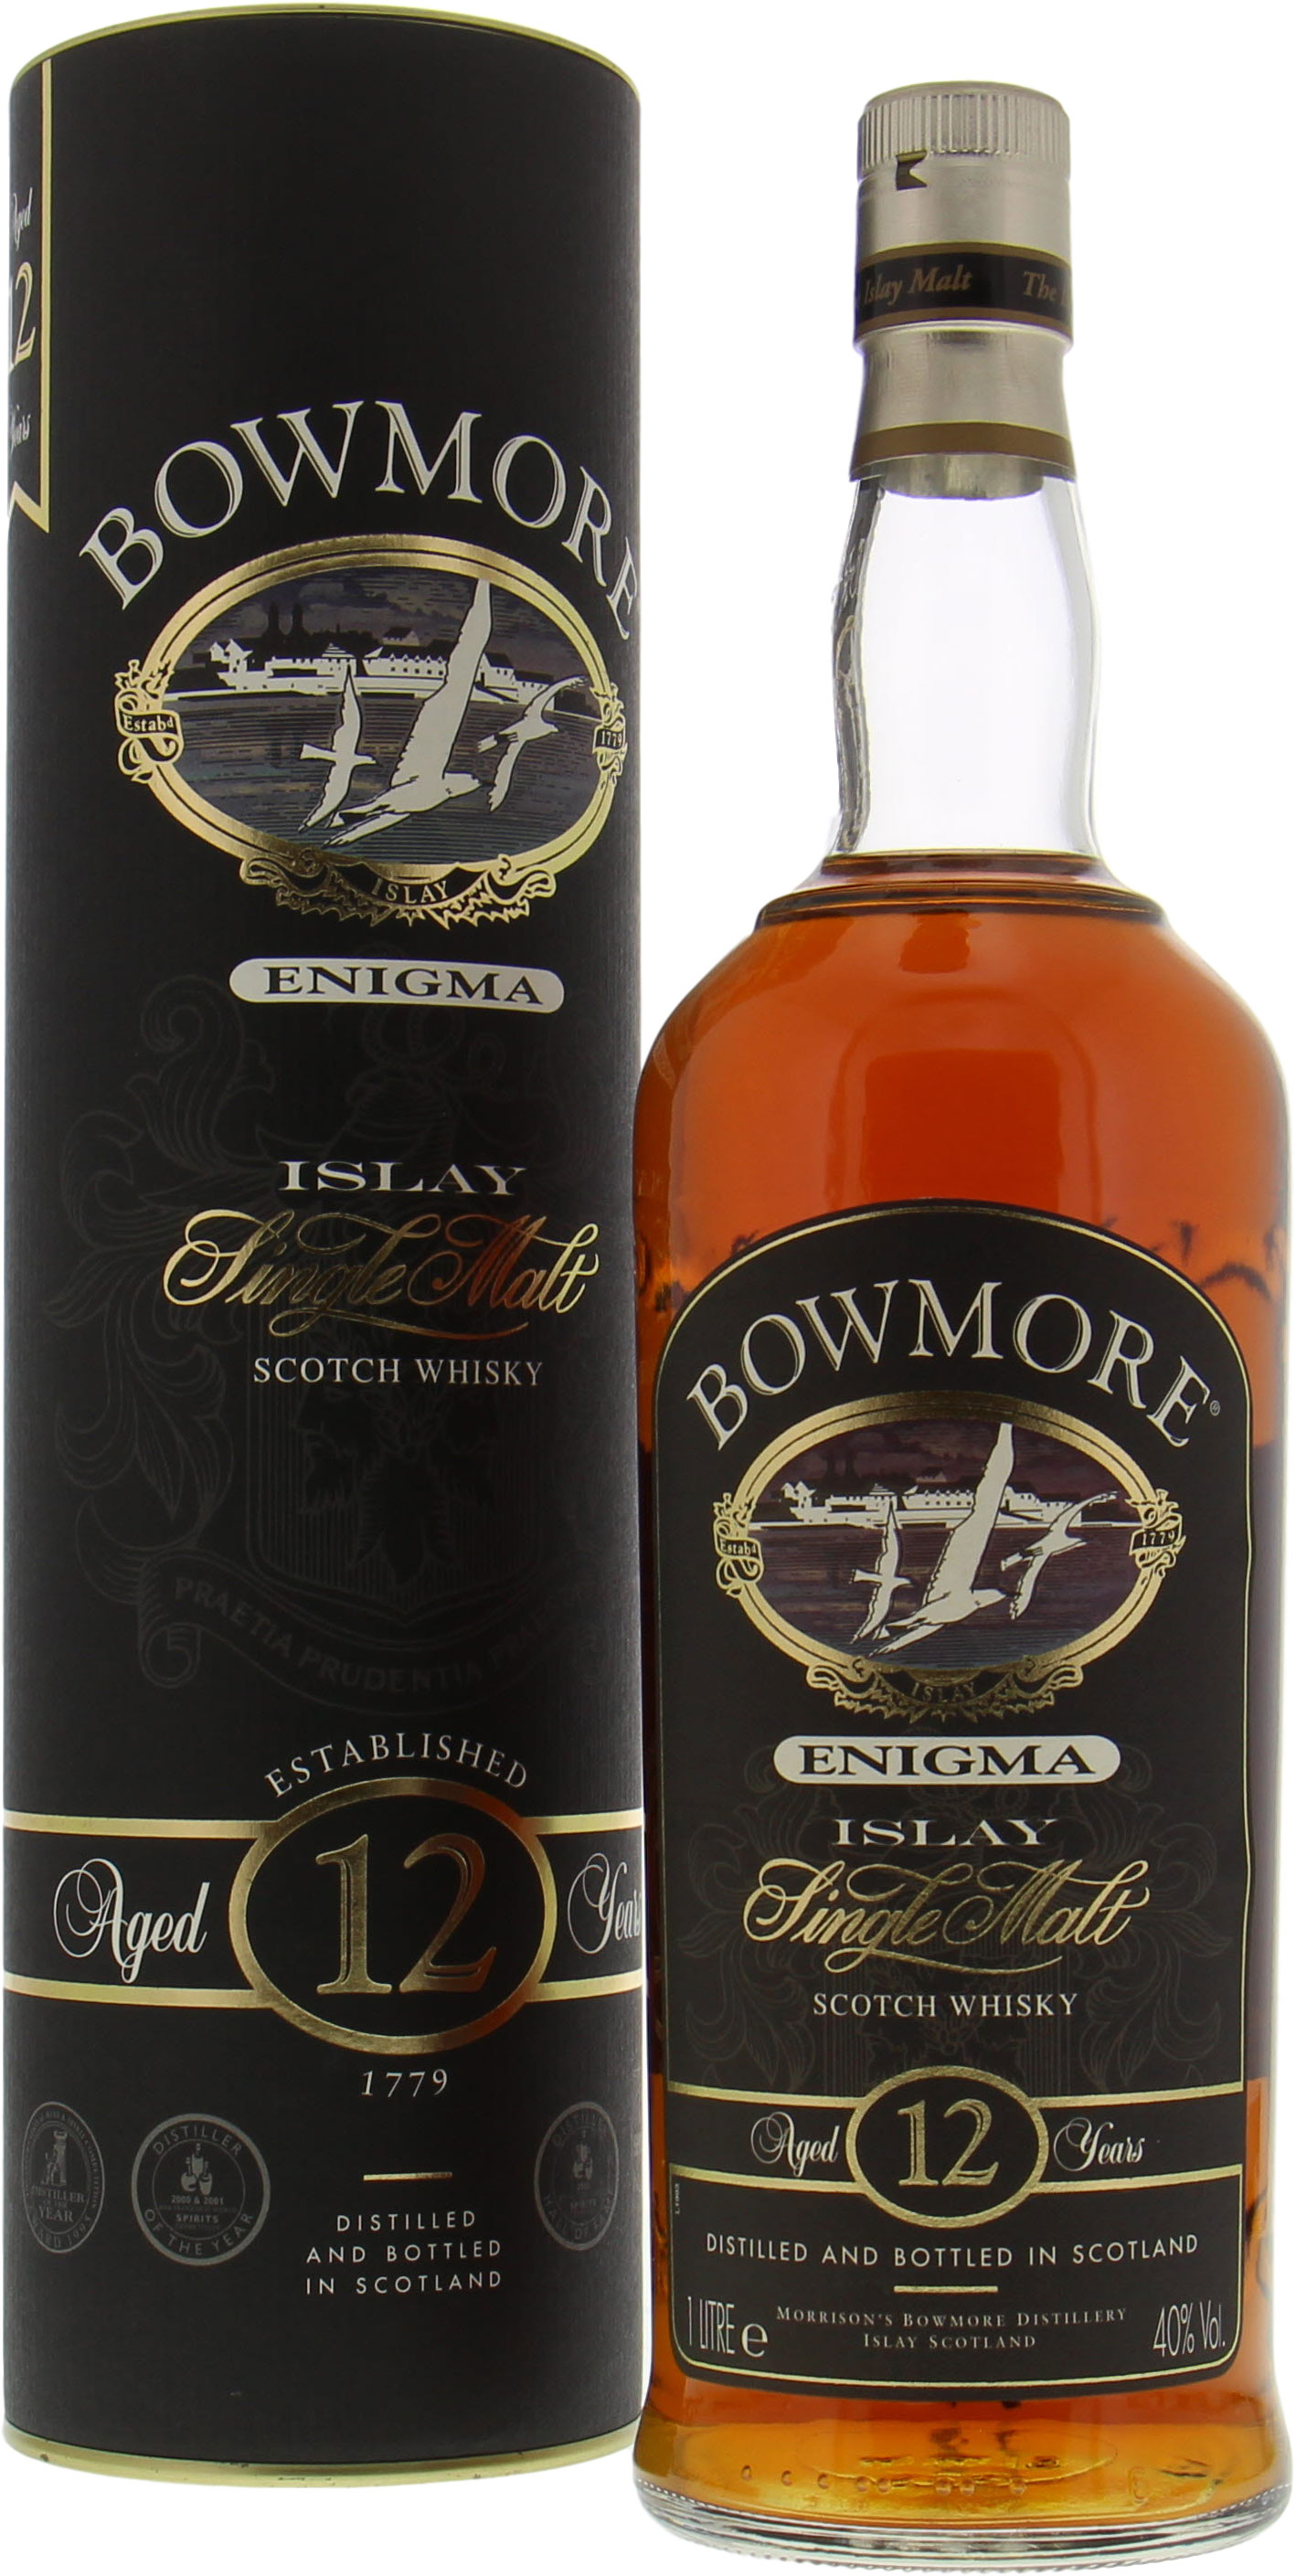 Bowmore - Enigma 12 Years Old 40% NV